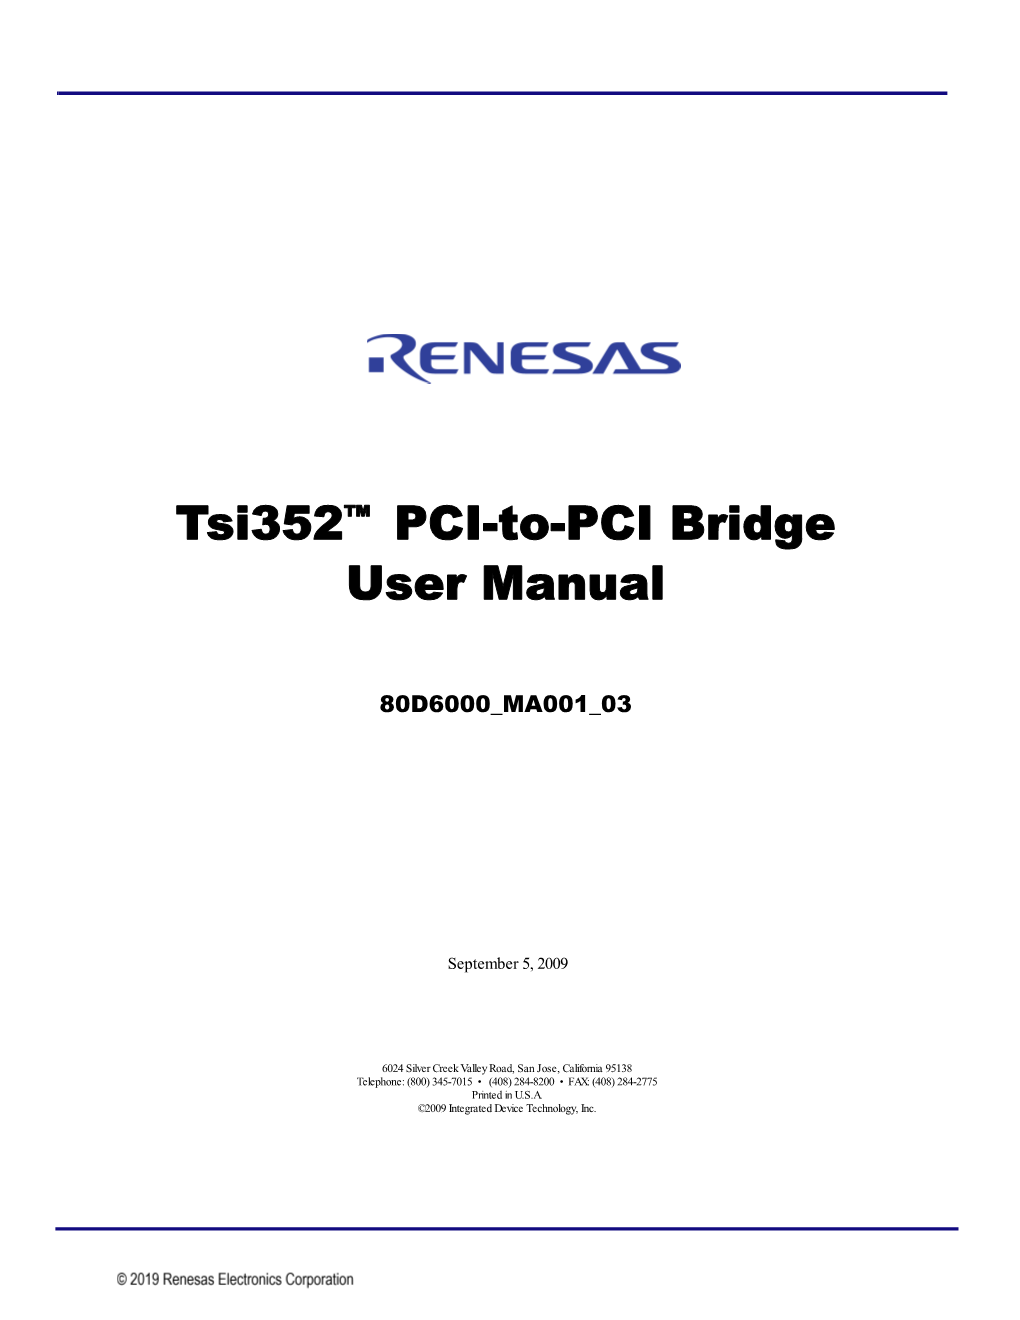 Tsi352 User Manual 80D6000 MA001 03 4 About This Document